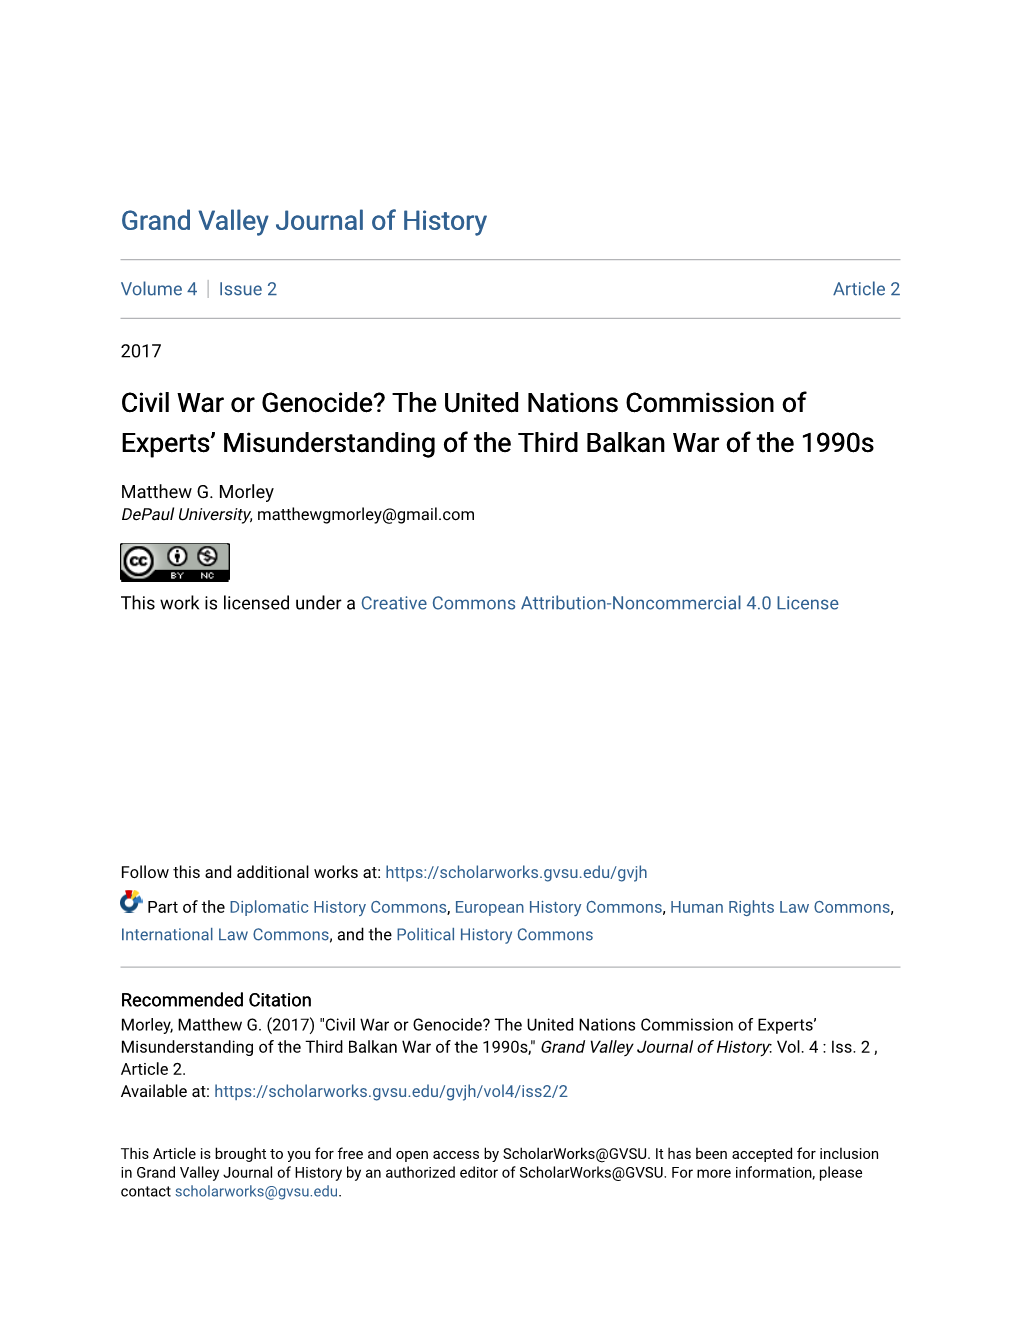 Civil War Or Genocide? the United Nations Commission of Experts’ Misunderstanding of the Third Balkan War of the 1990S